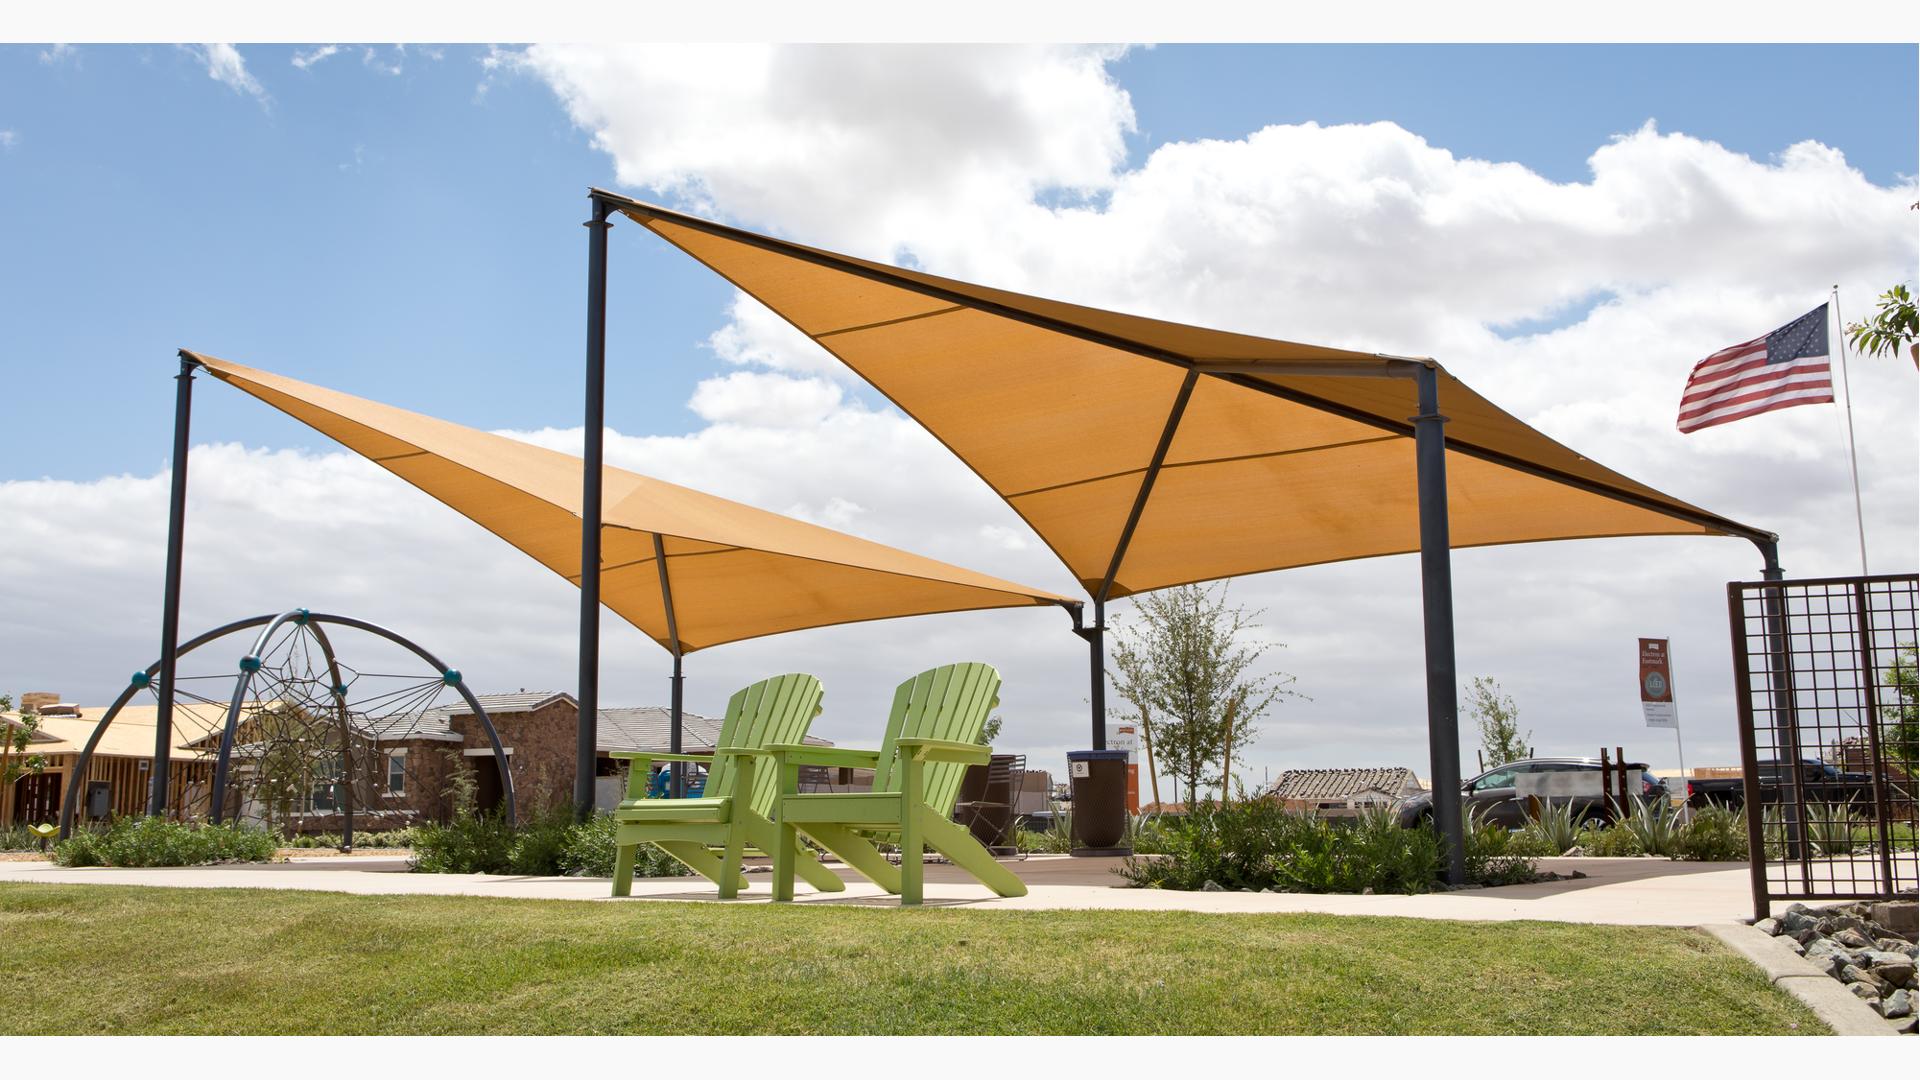 A pair of green lawn chair sit in front of a playground climber shaded by two peak side-by-side tan shade structures.